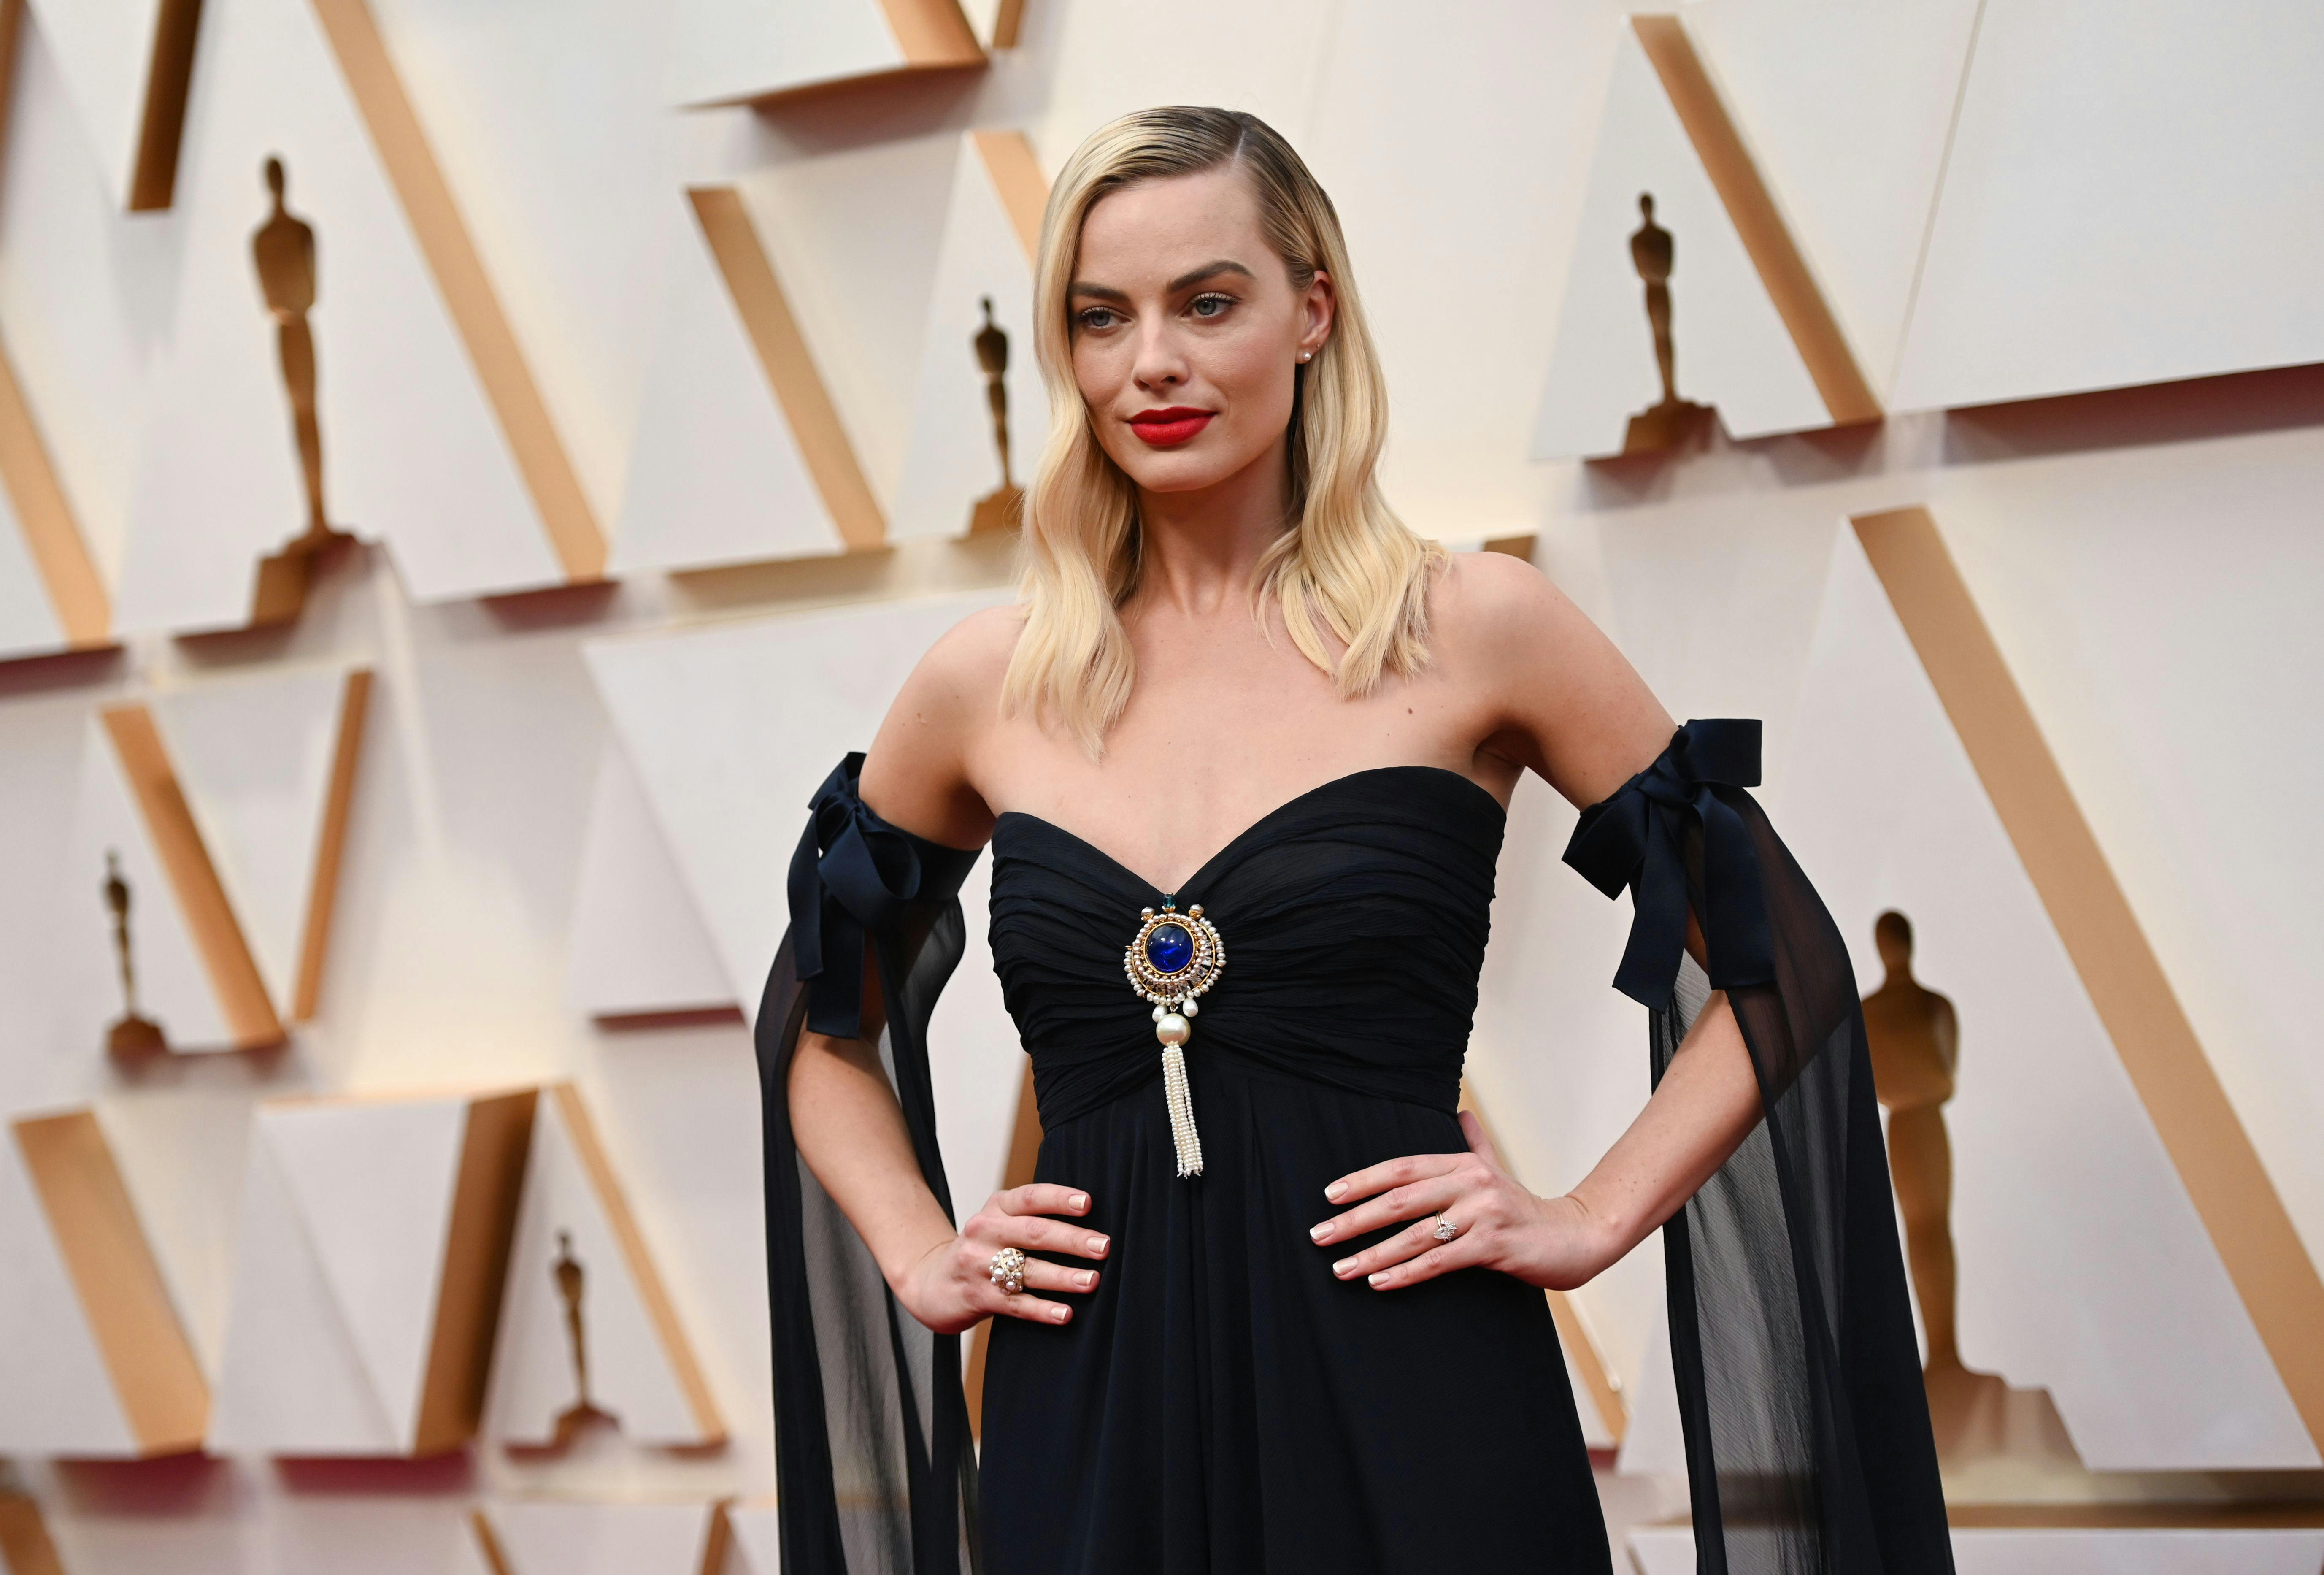 The Oscars Red Carpet Fashion 2020 Was Dominated By Sustainability